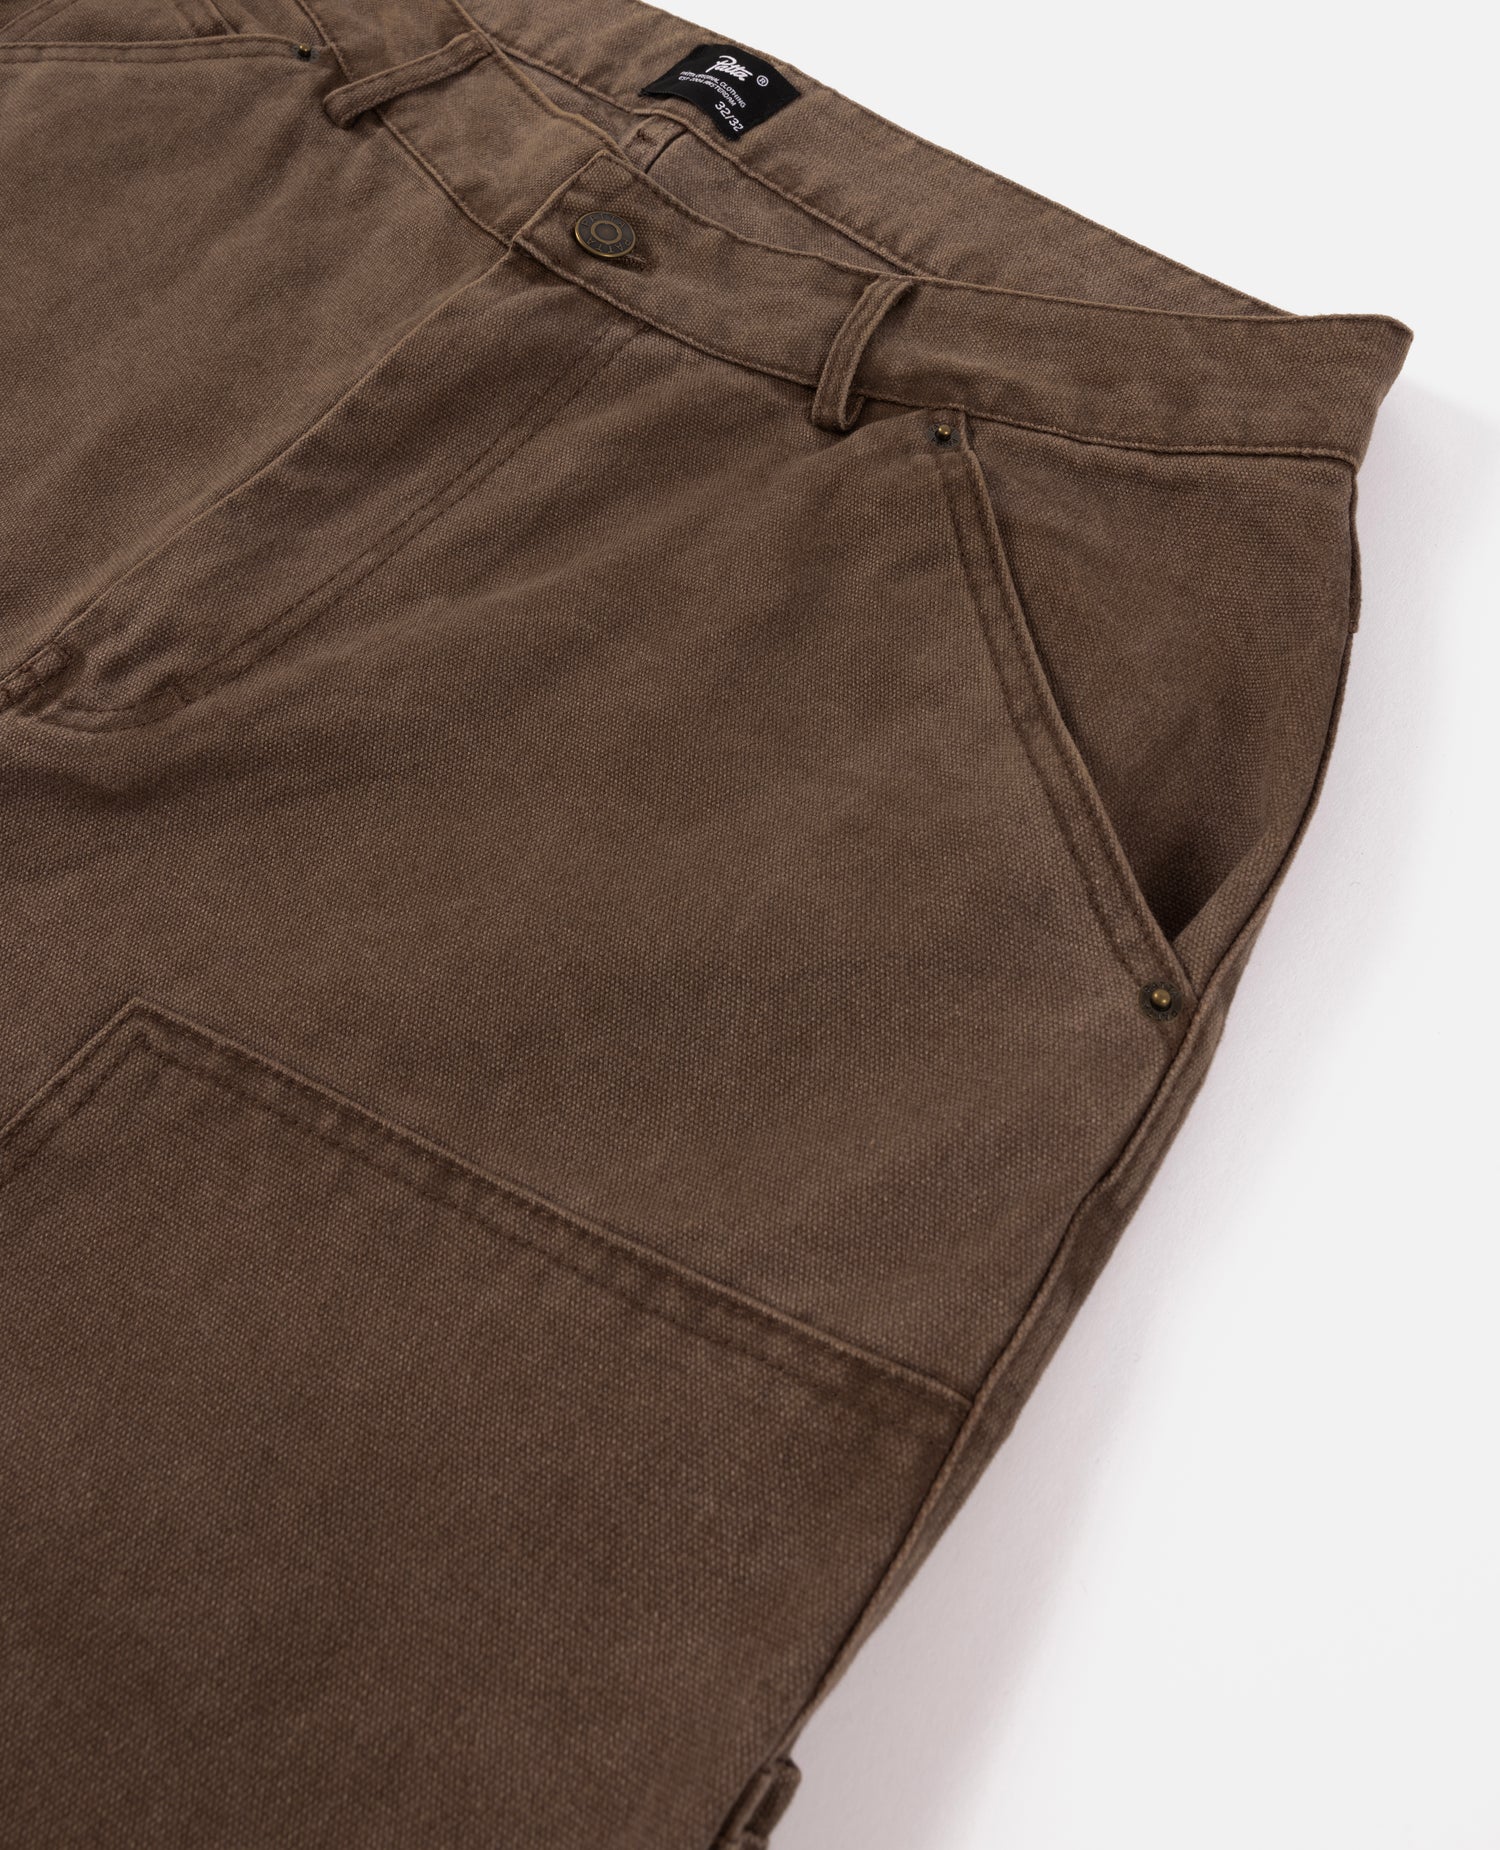 Patta Canvas Painter Pants (Washed Brown)